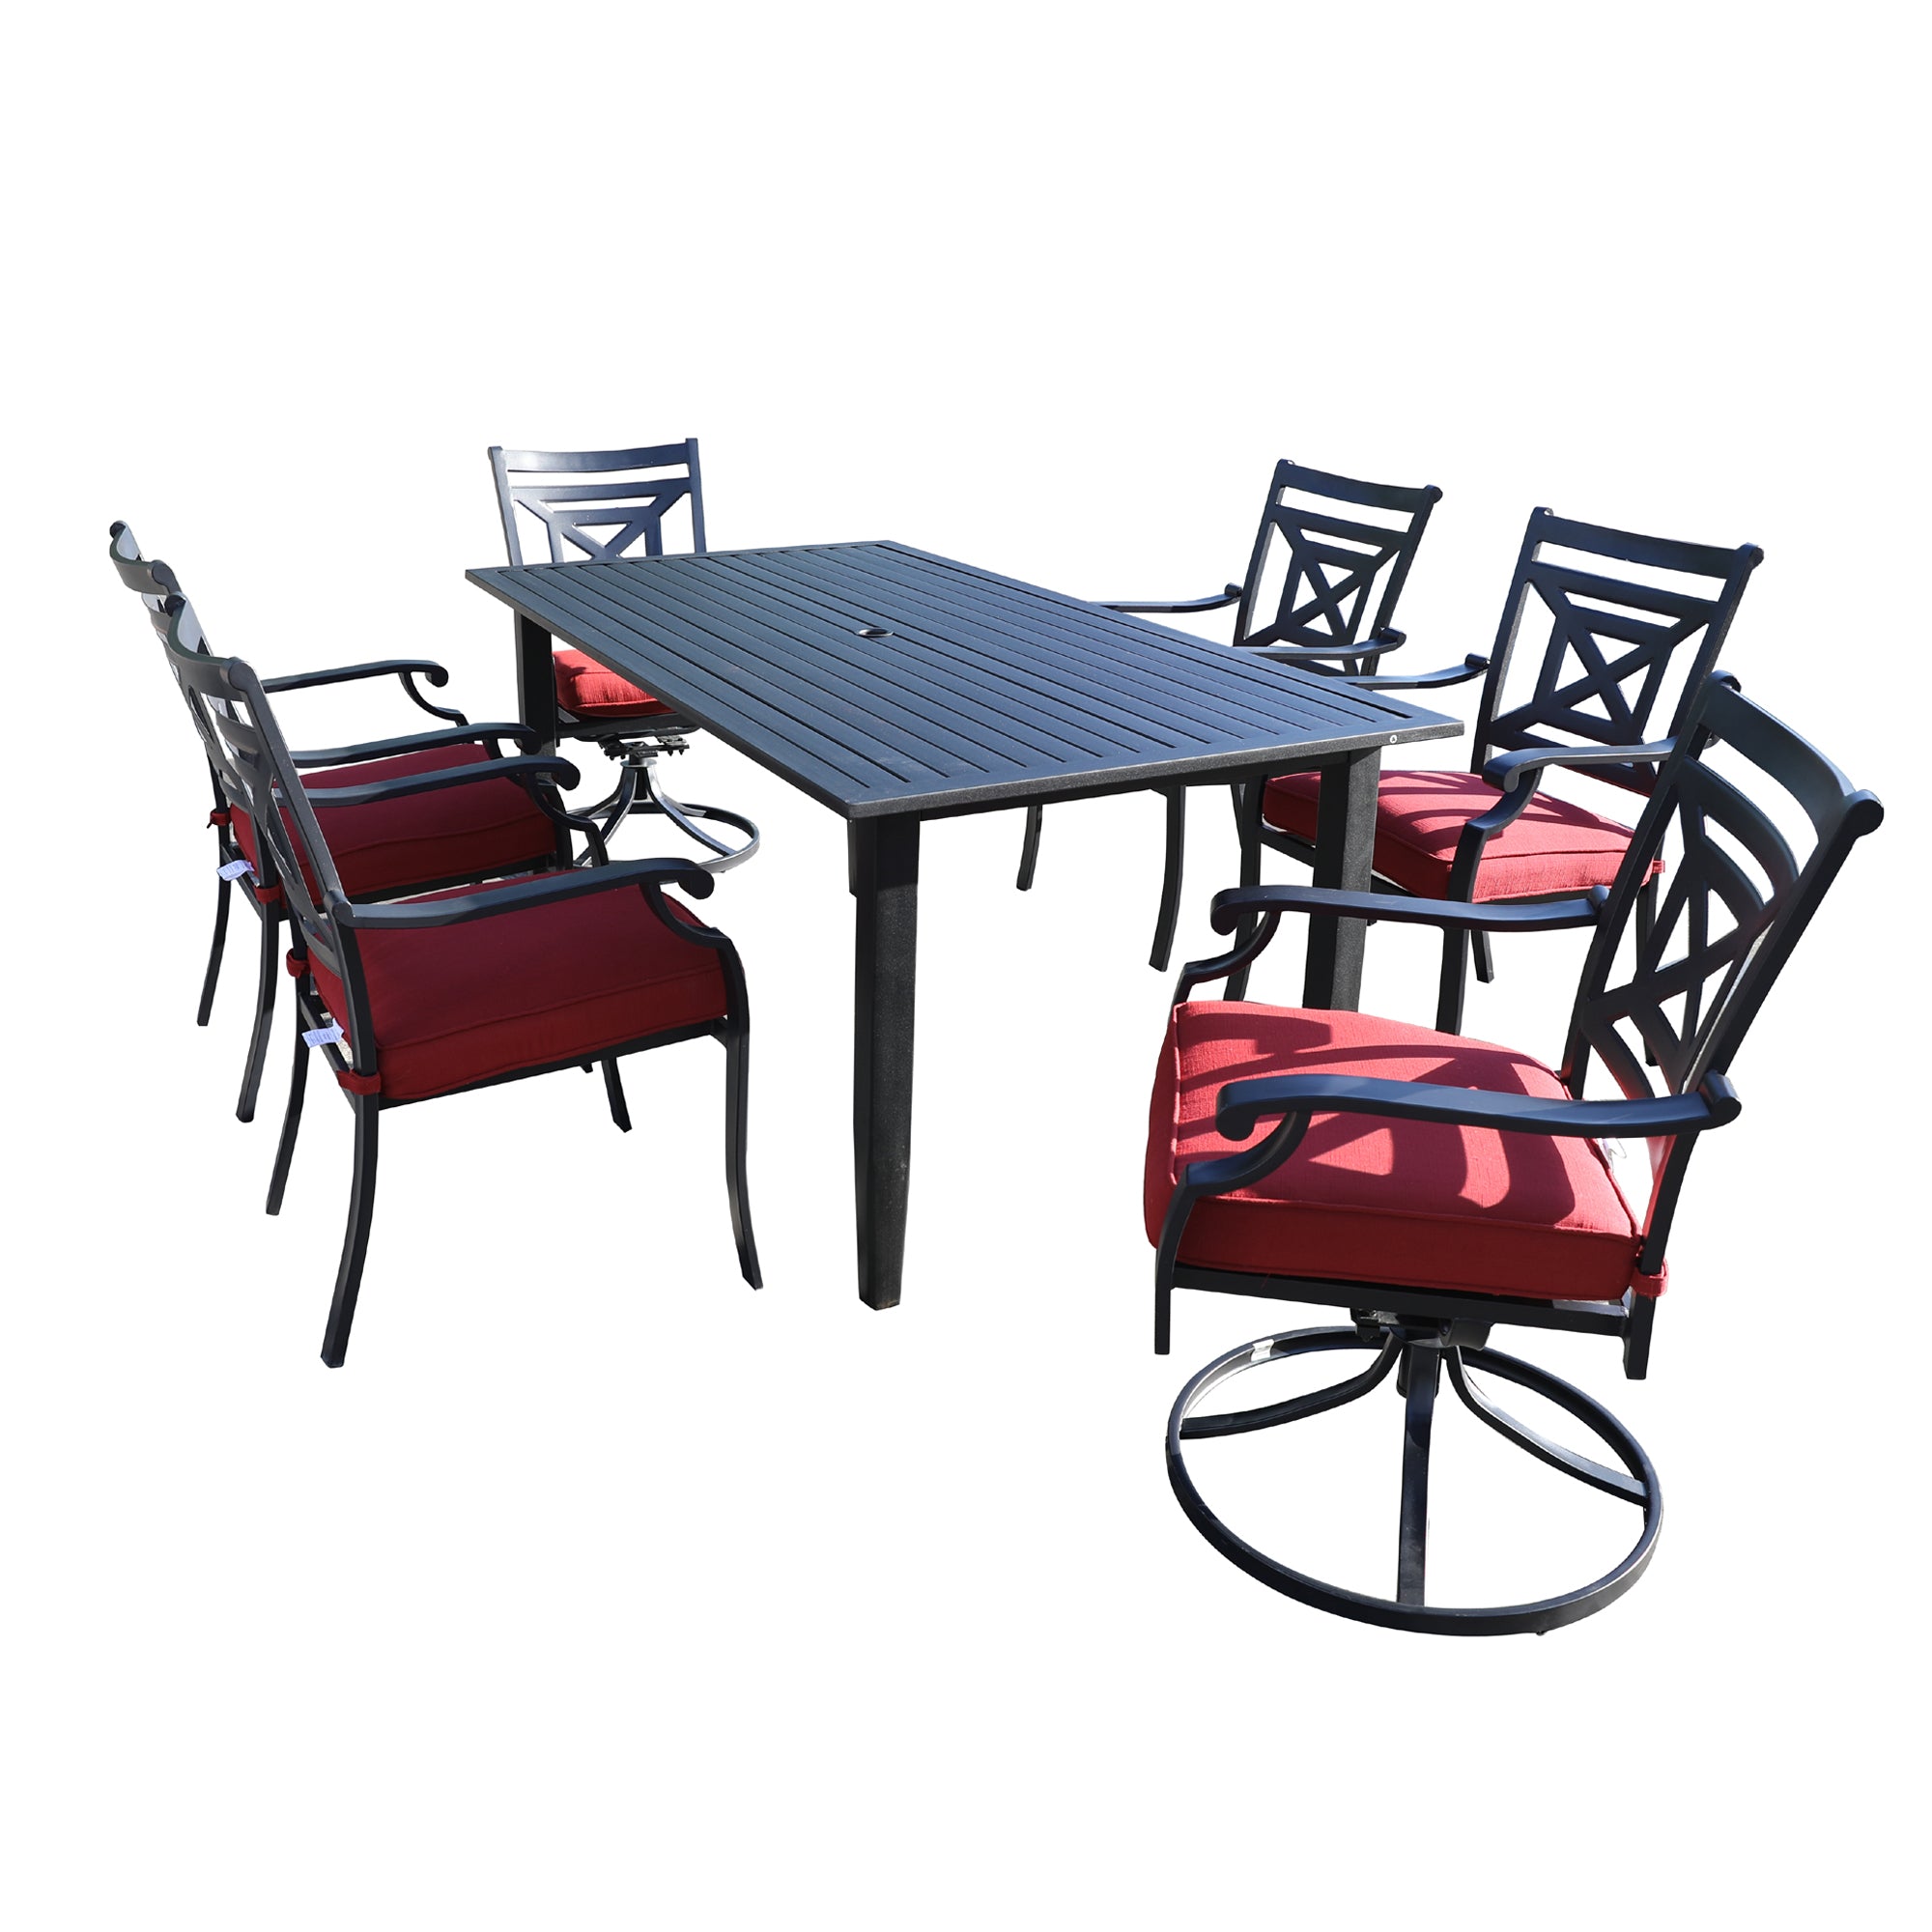 The Complete Guide to Buying an Outdoor Dining Set